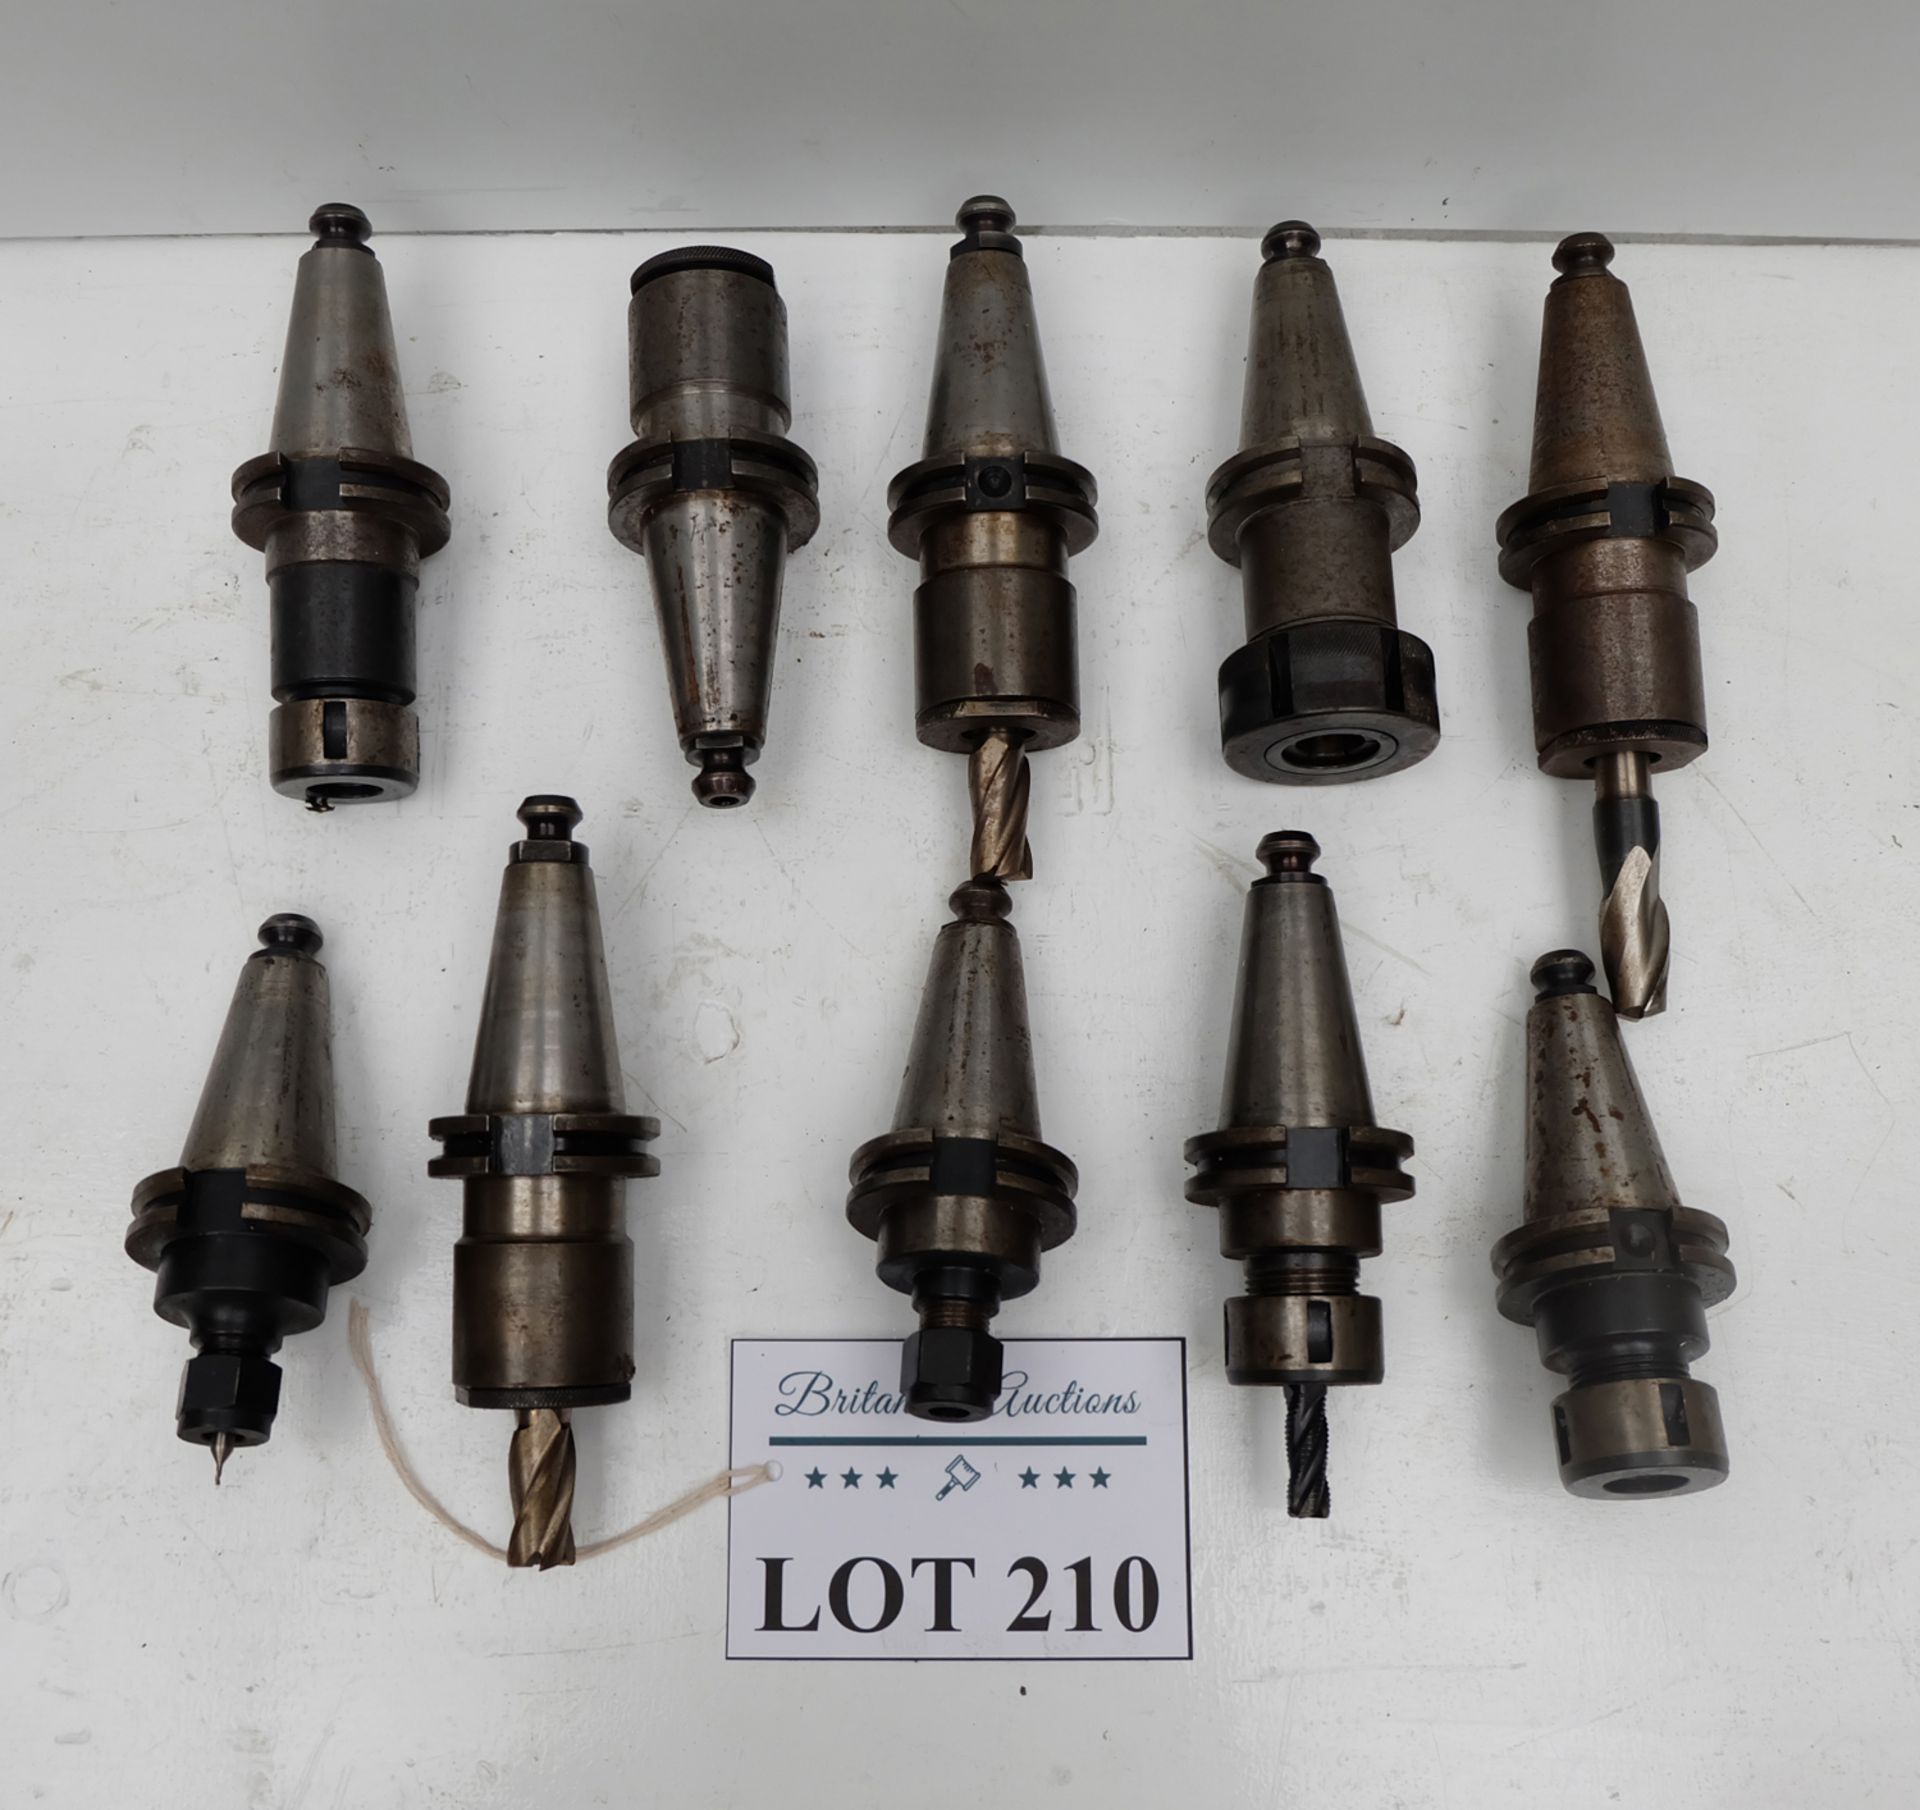 Quantity of 10 x Cat 40 Spindle Tooling. - Image 2 of 3